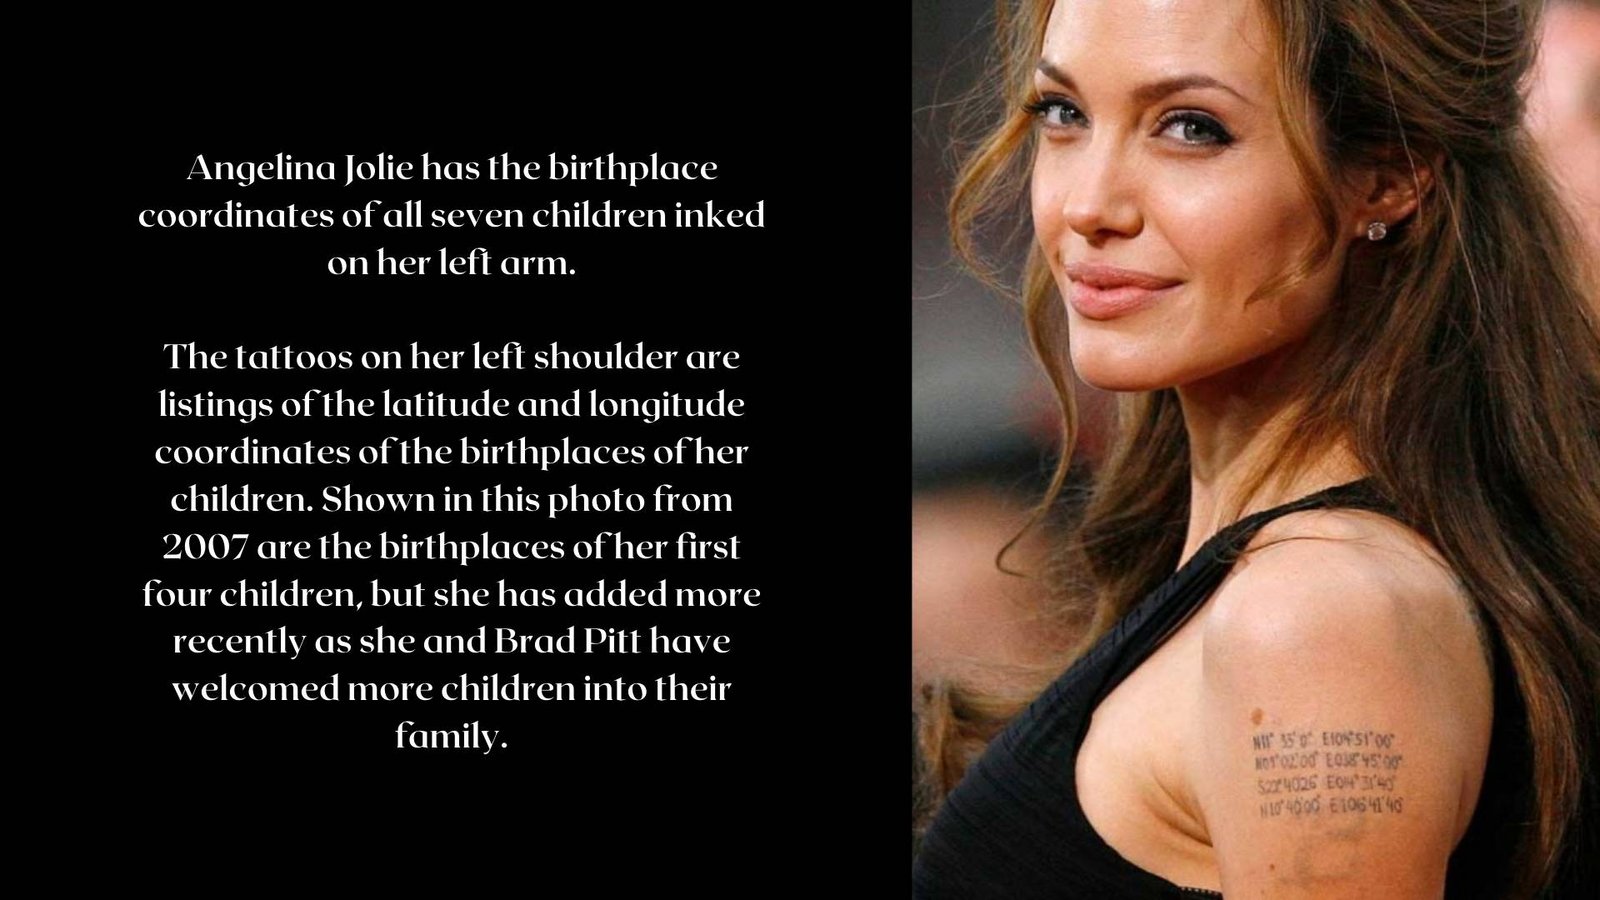 Angelina Jolie’s Tattoos & Their Meanings